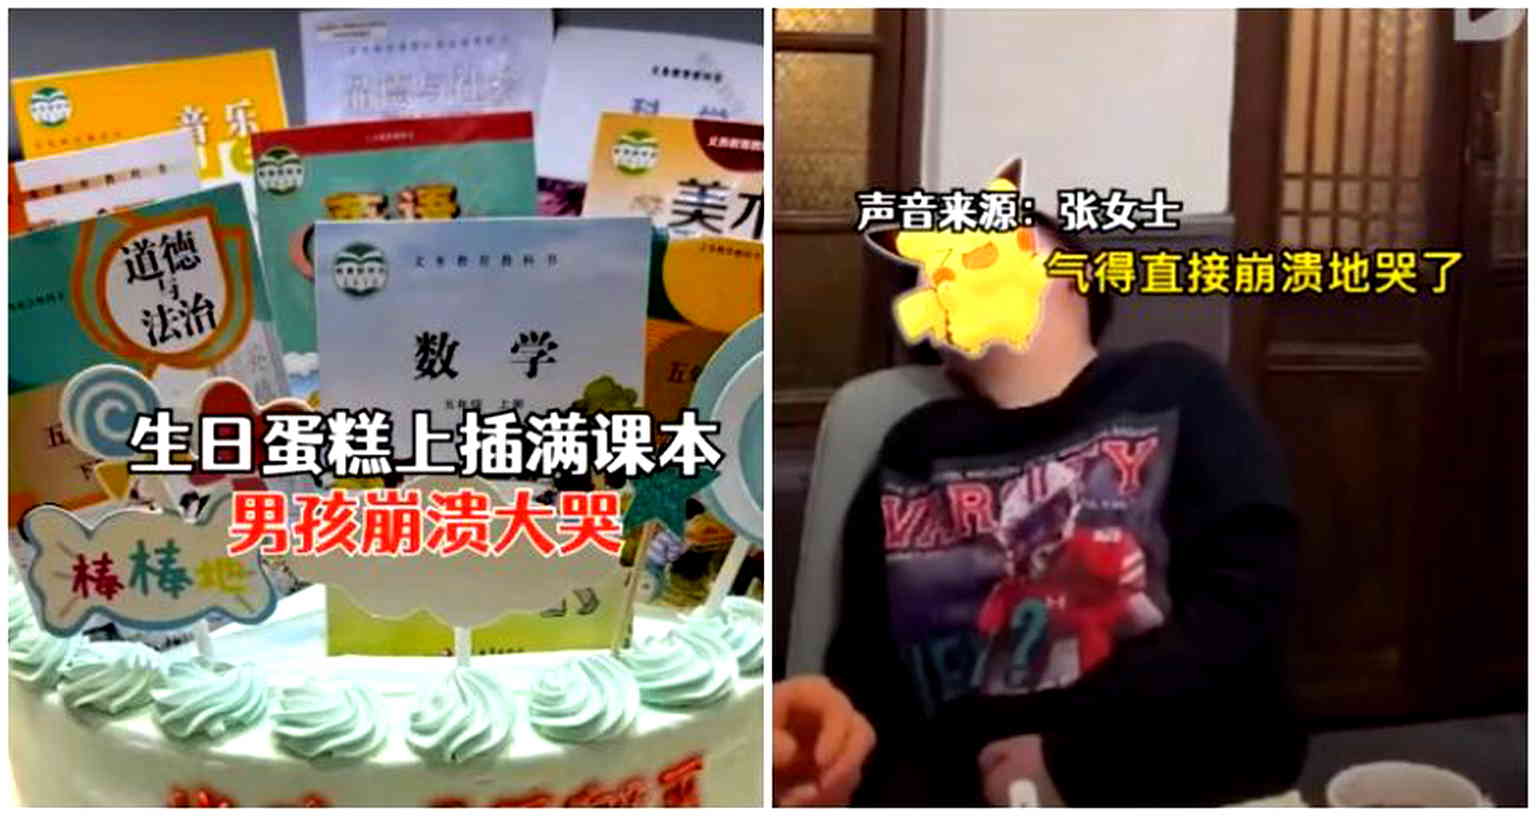 Video of 11-year-old Pikachu fan heartbroken by mom’s math homework-themed cake surprise goes viral